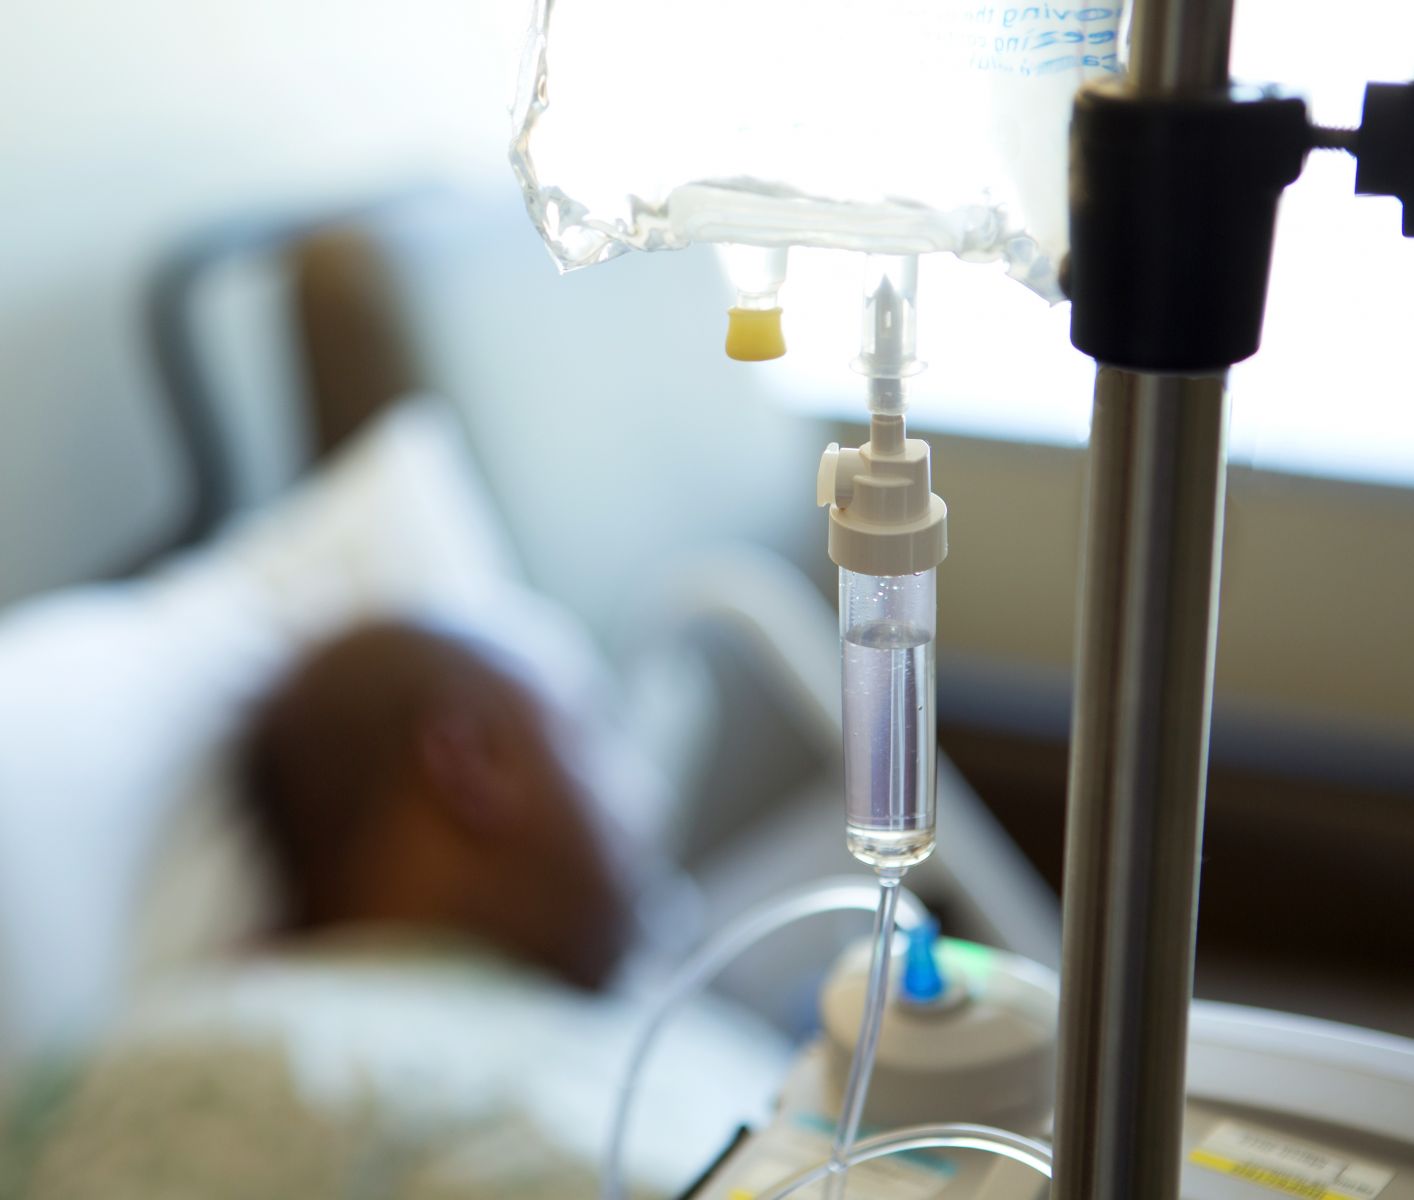 A black patient receiving intravenous therapy in a hospital bed